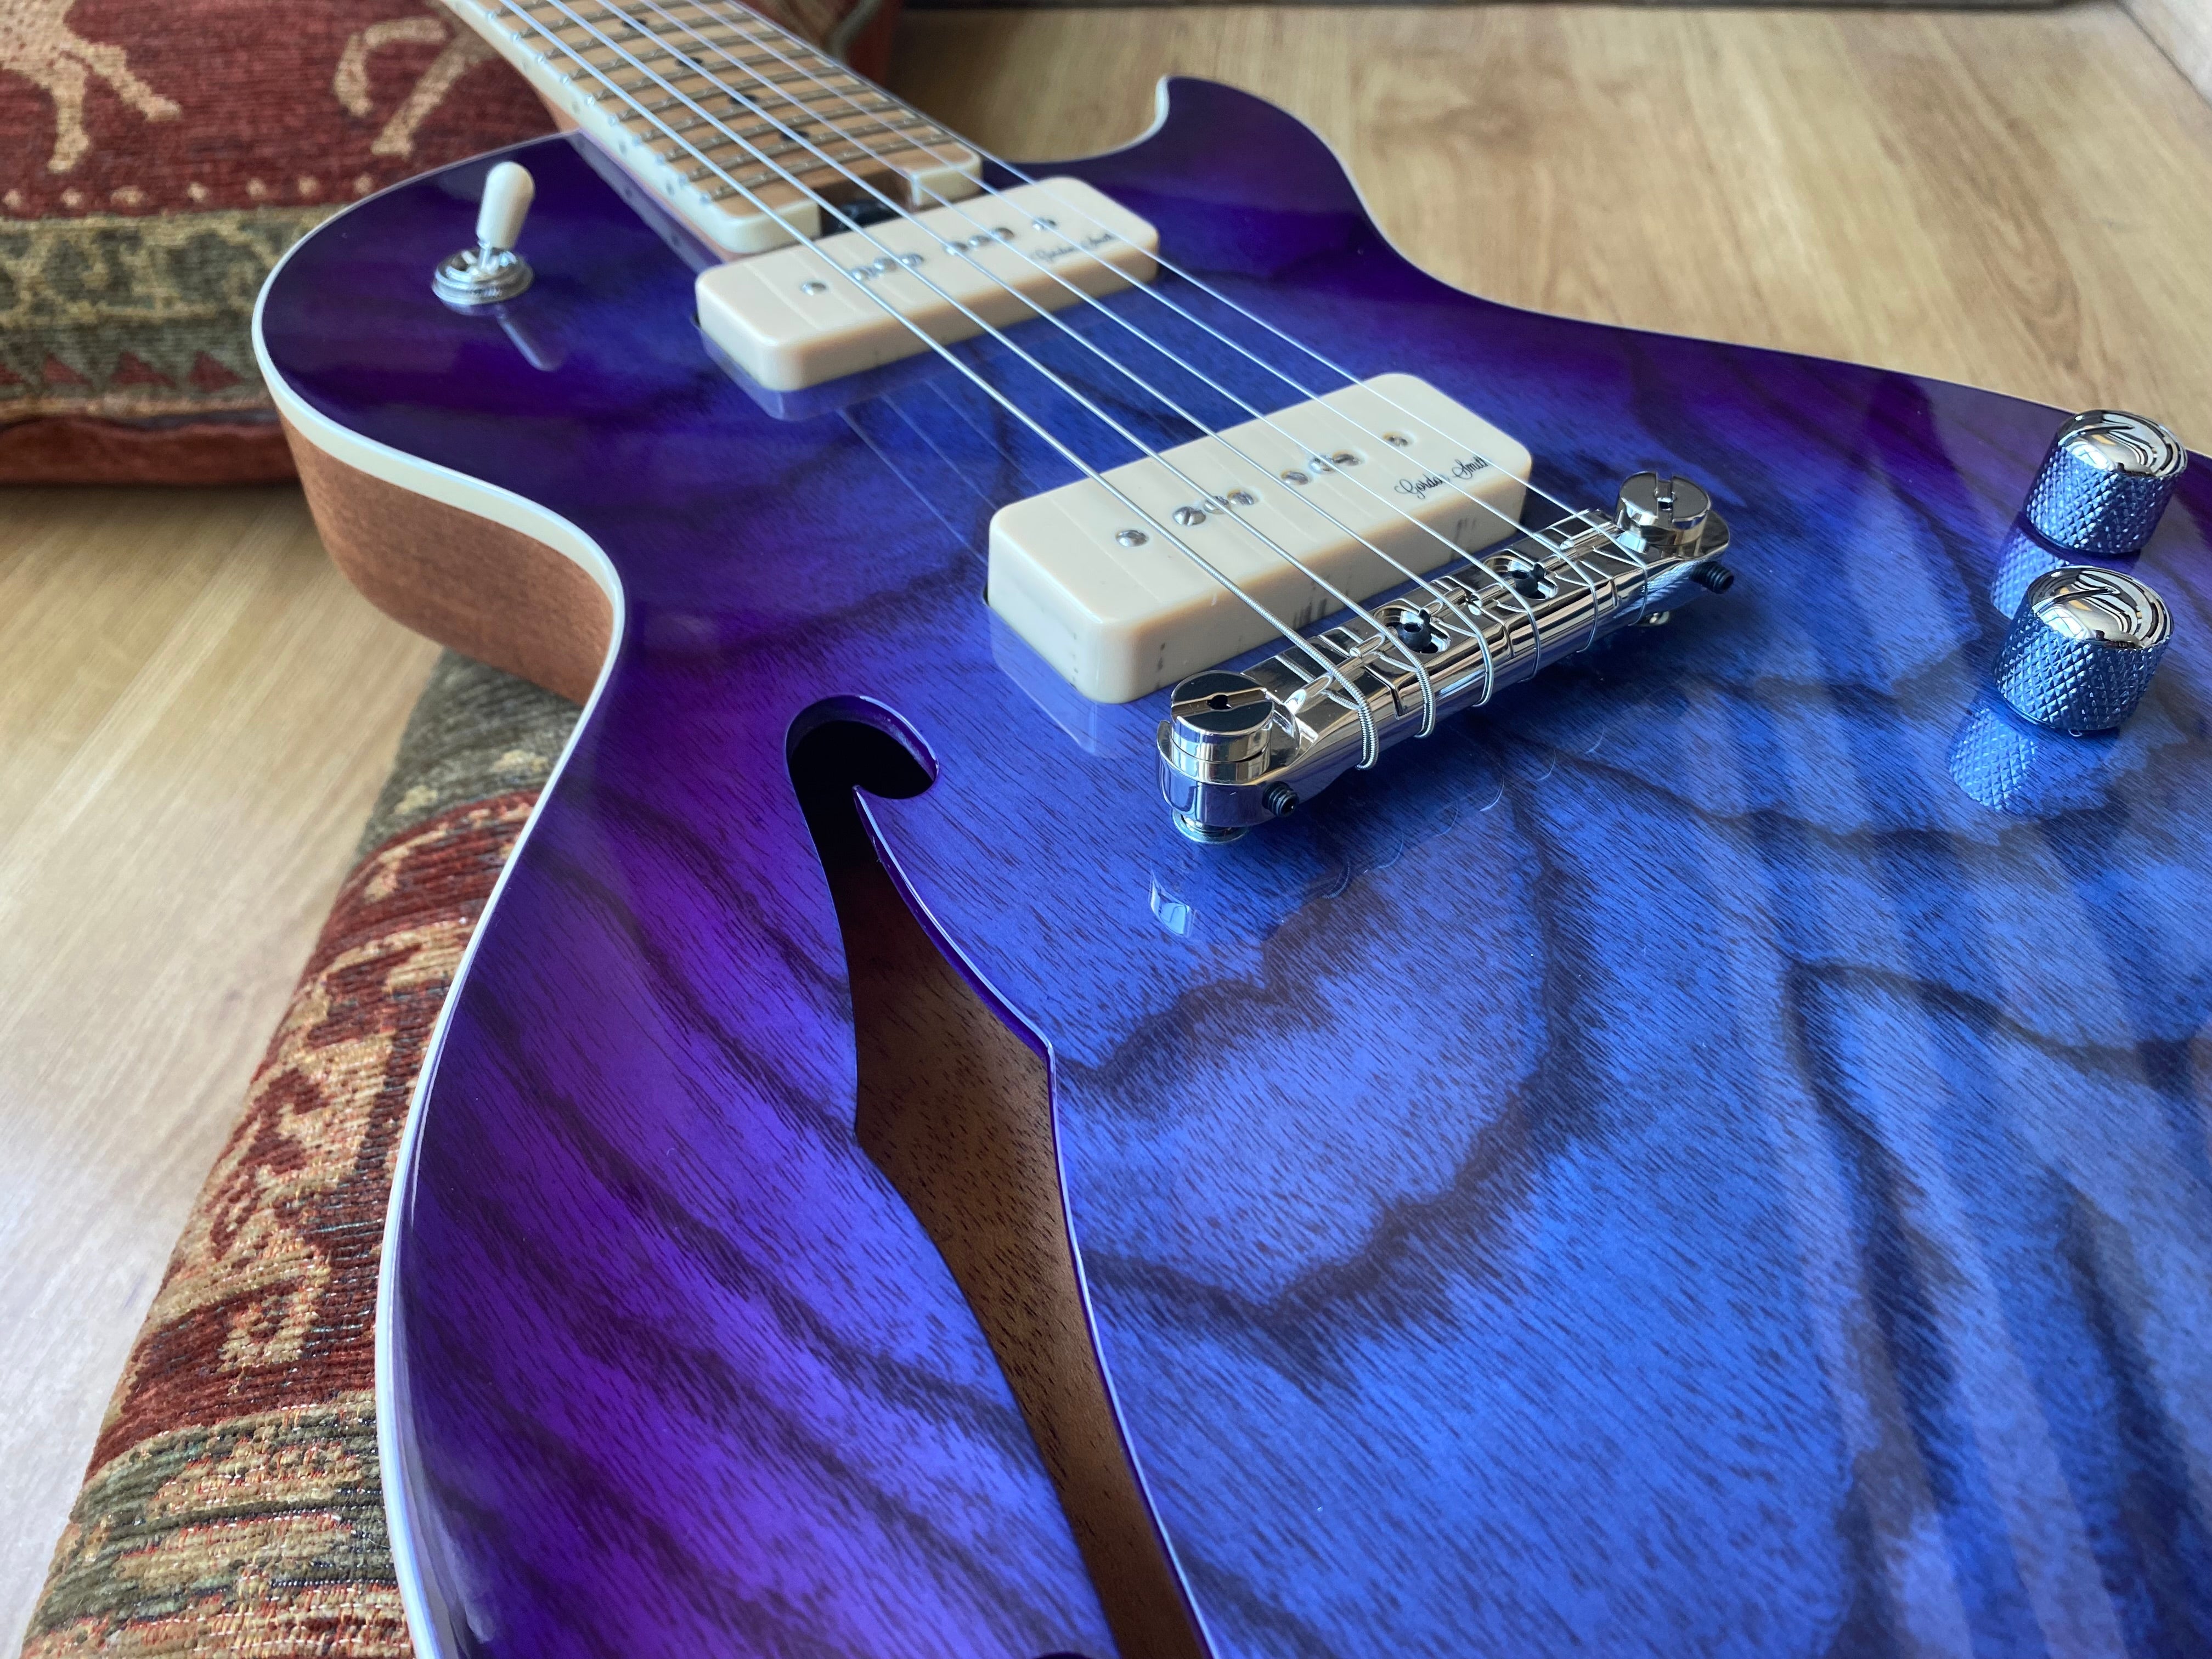 Gordon Smith GS Deluxe Semi Solid 60 Swamp Ash Top Custom Blueberry Burst, Electric Guitar for sale at Richards Guitars.